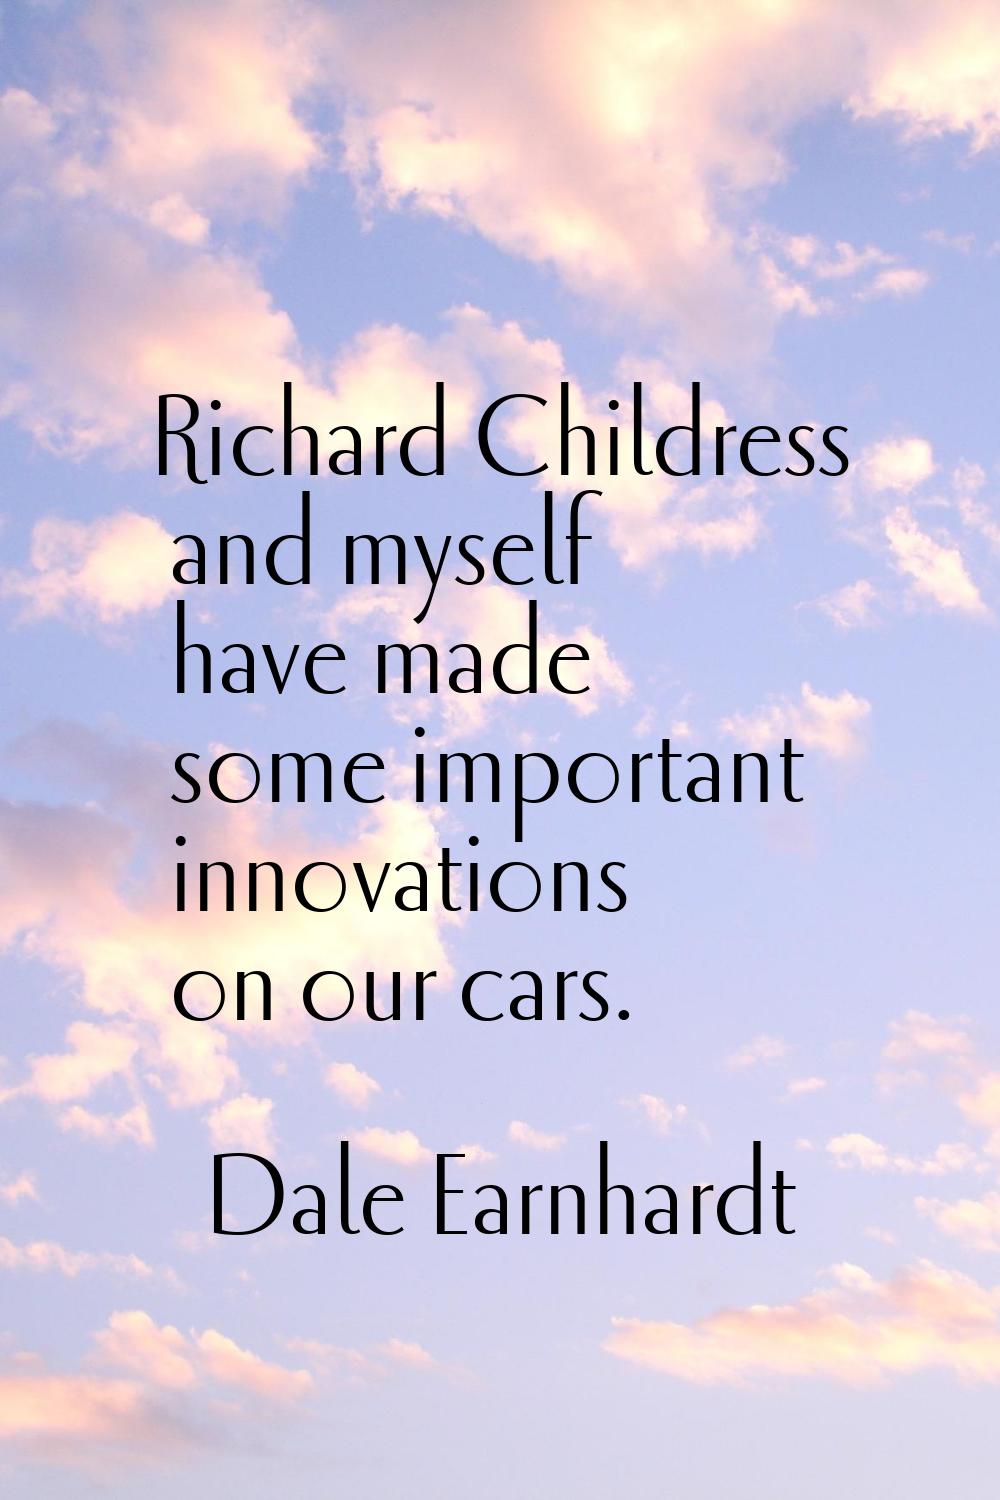 Richard Childress and myself have made some important innovations on our cars.